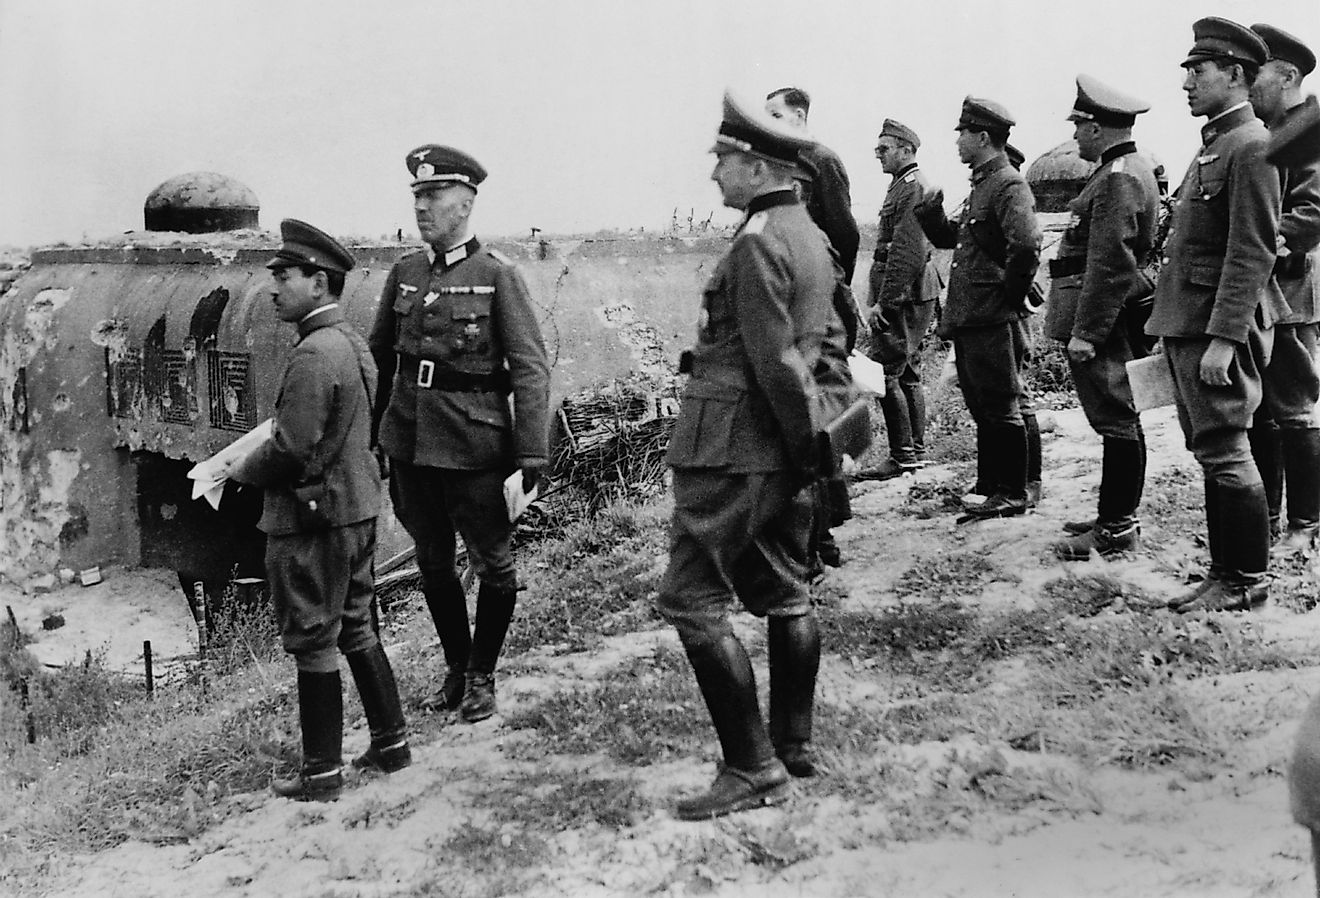 Japanese officers inspect Maginot Line, after the German defeat of France in World War II.